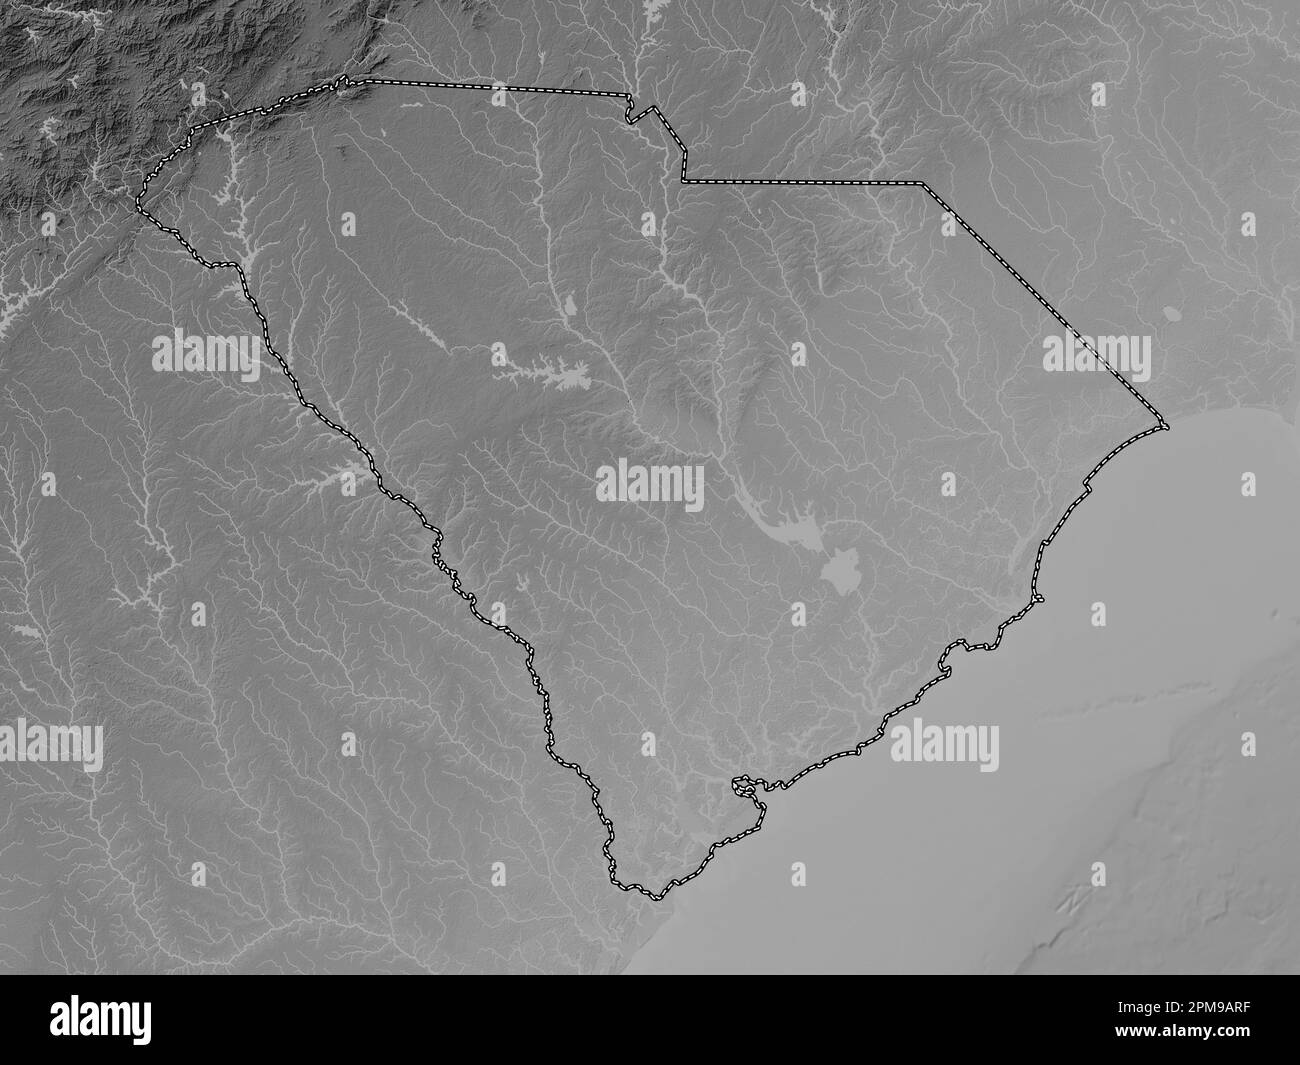 South Carolina, state of United States of America. Grayscale elevation map with lakes and rivers Stock Photo